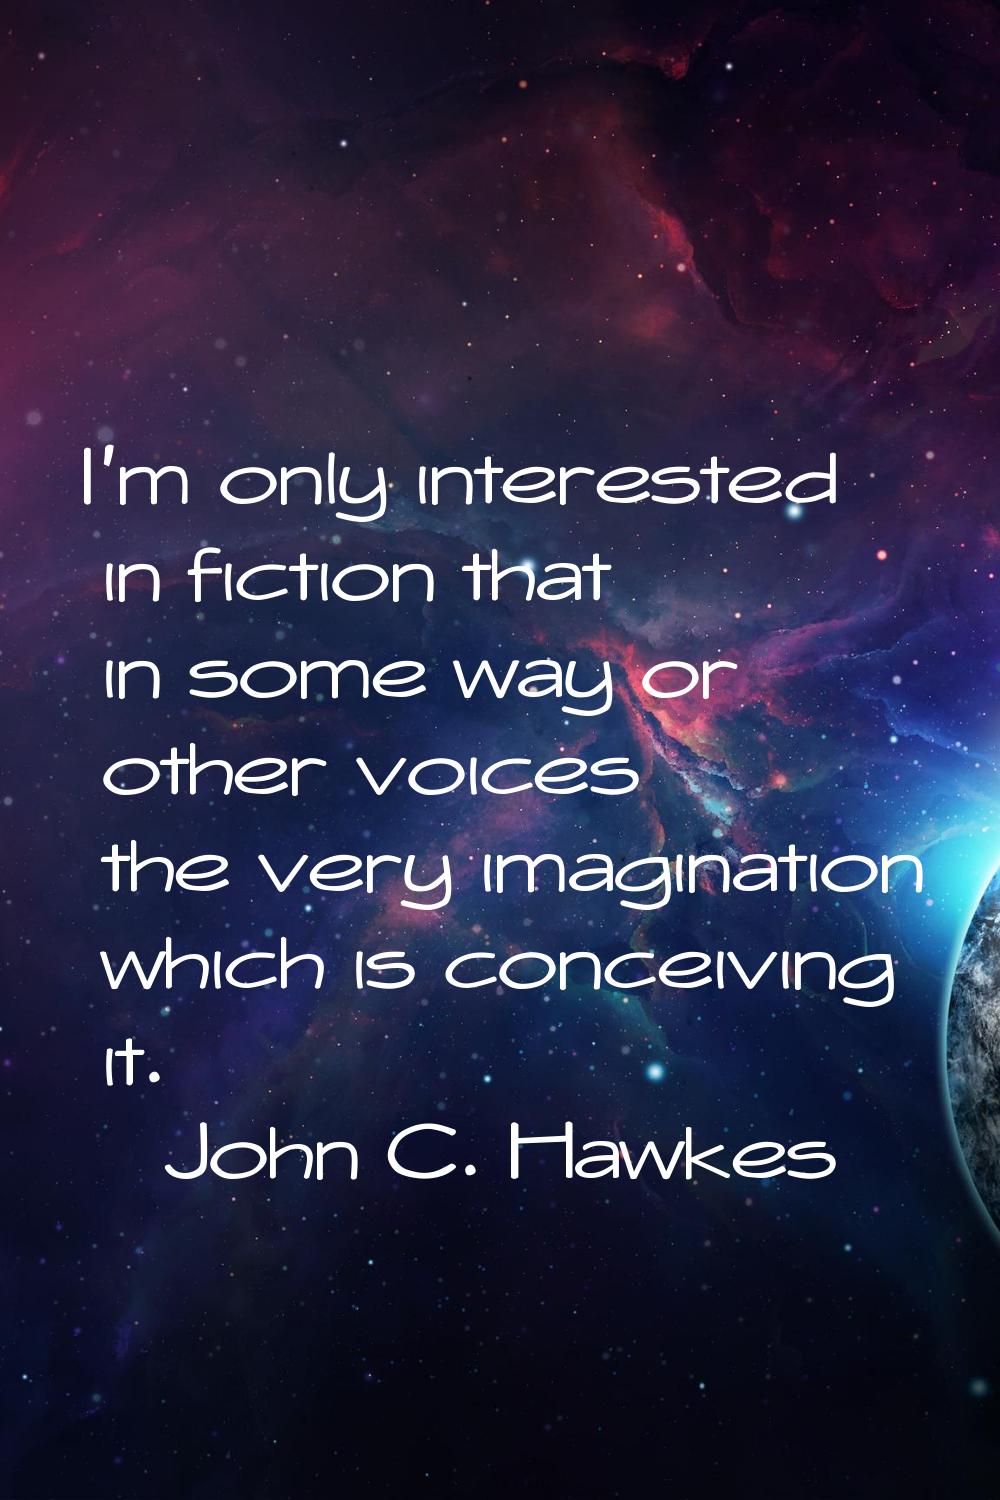 I'm only interested in fiction that in some way or other voices the very imagination which is conce